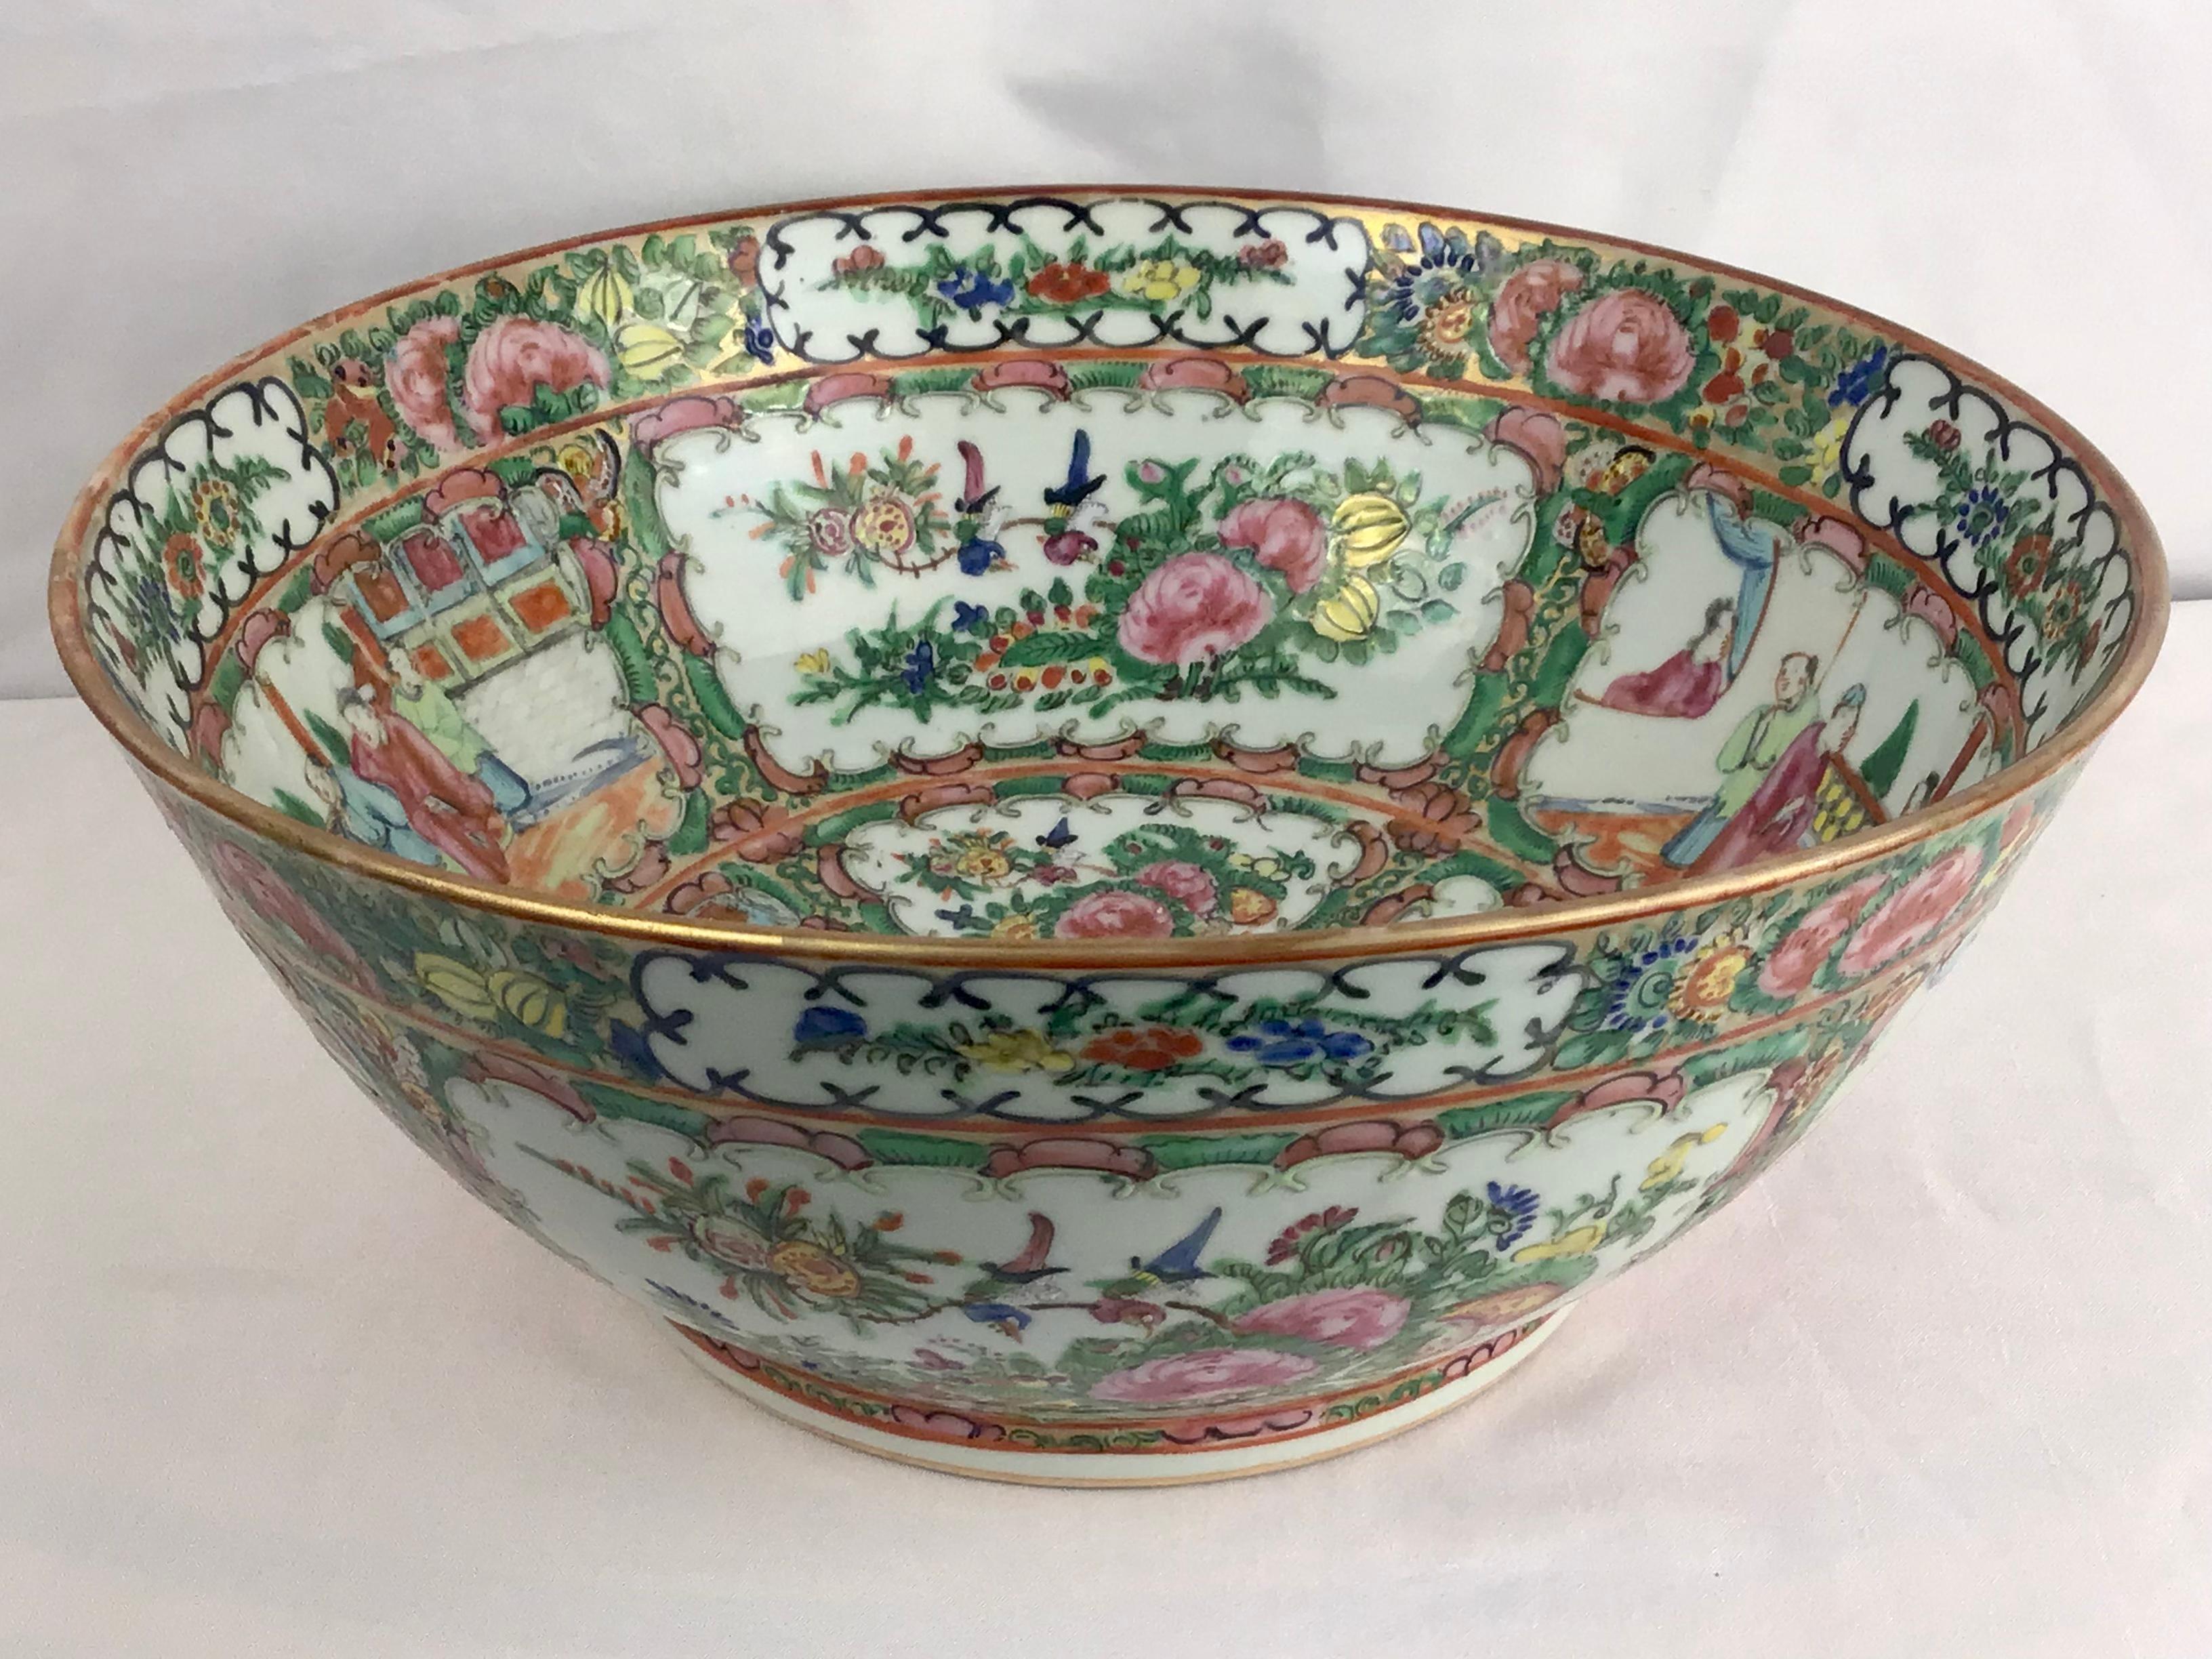 Traditional Chinese Rose Medallion large bowl with social scenes and nature motifs of butterflies, florals, and birds. A very nice larger size bowl! All hand painted with enamel and gilt accents. 